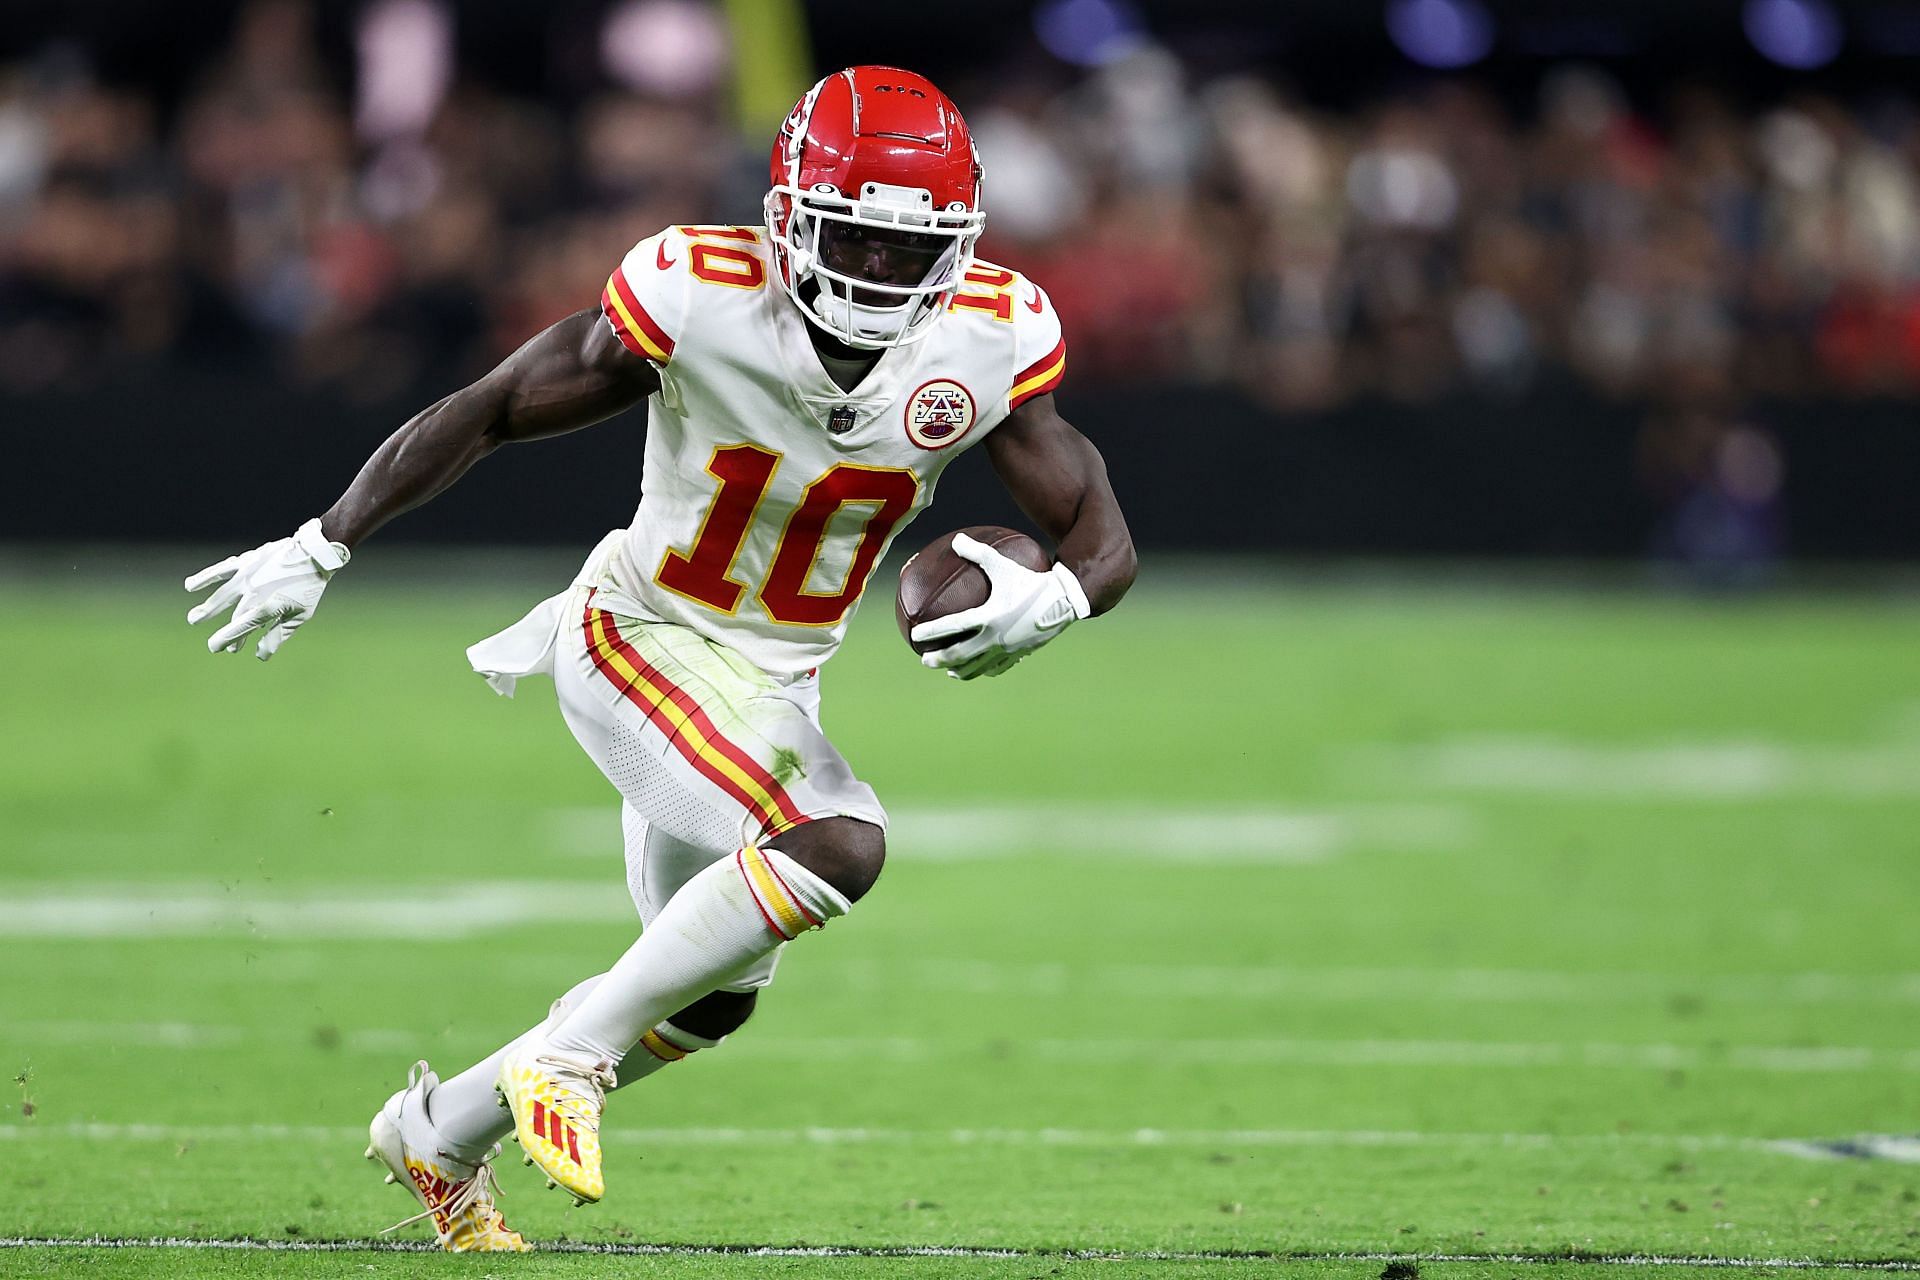 Kansas City Chiefs' Tyreek Hill is working to outrun past